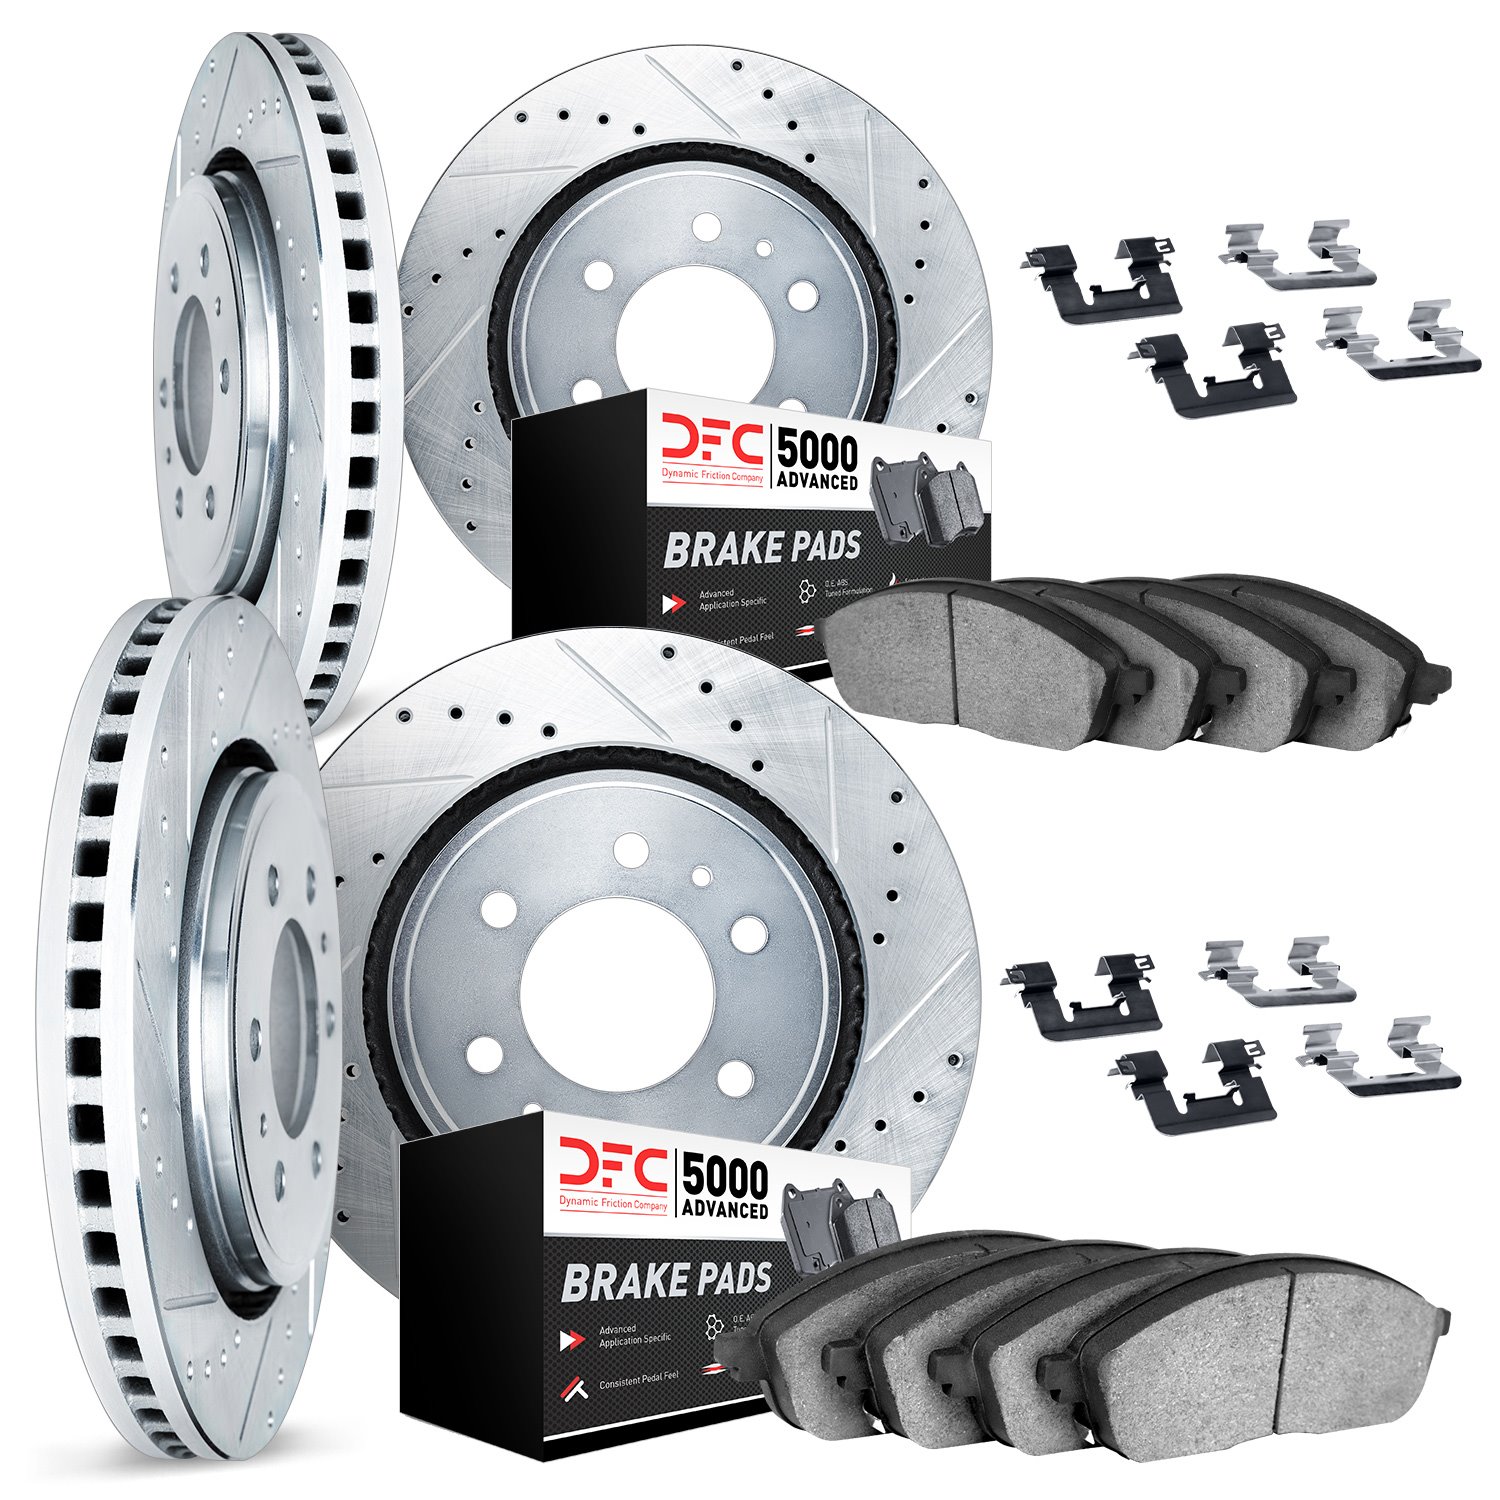 7514-68011 Drilled/Slotted Brake Rotors w/5000 Advanced Brake Pads Kit & Hardware [Silver], Fits Select Infiniti/Nissan, Positio